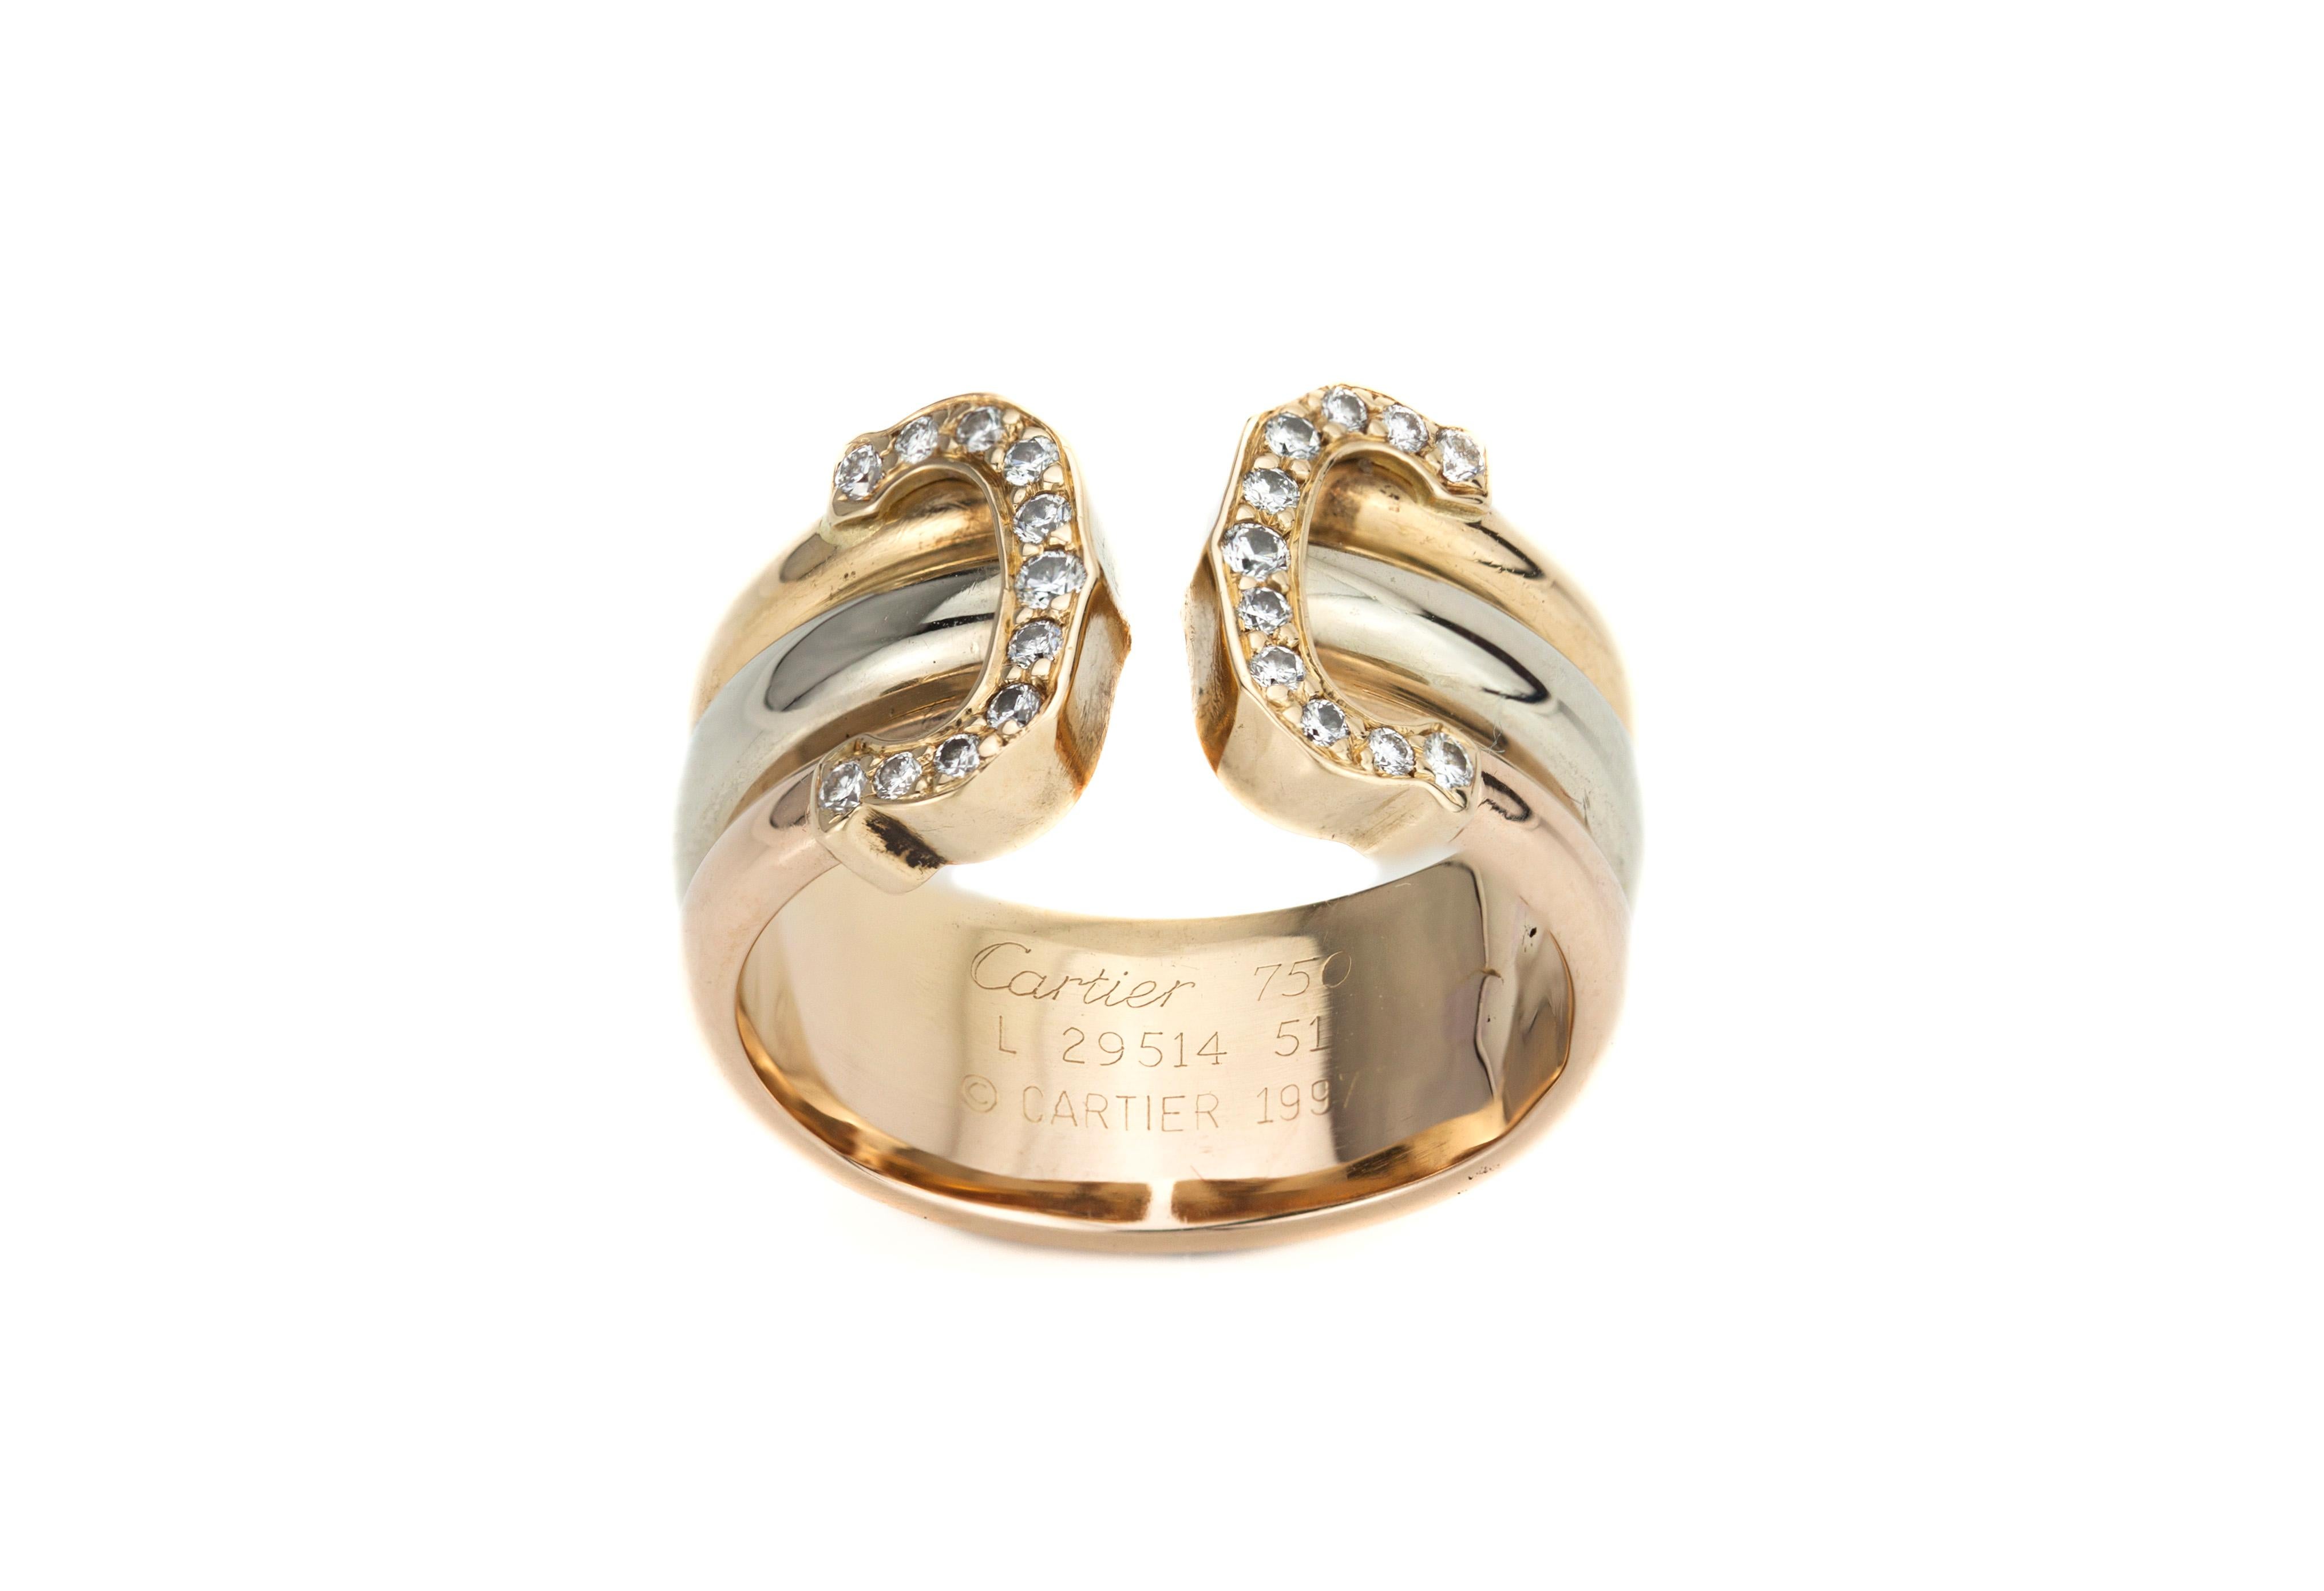 French Cut 18kt Gold Ladies Cartier Ring with Diamonds, Made in France, Paris, circa 1990s